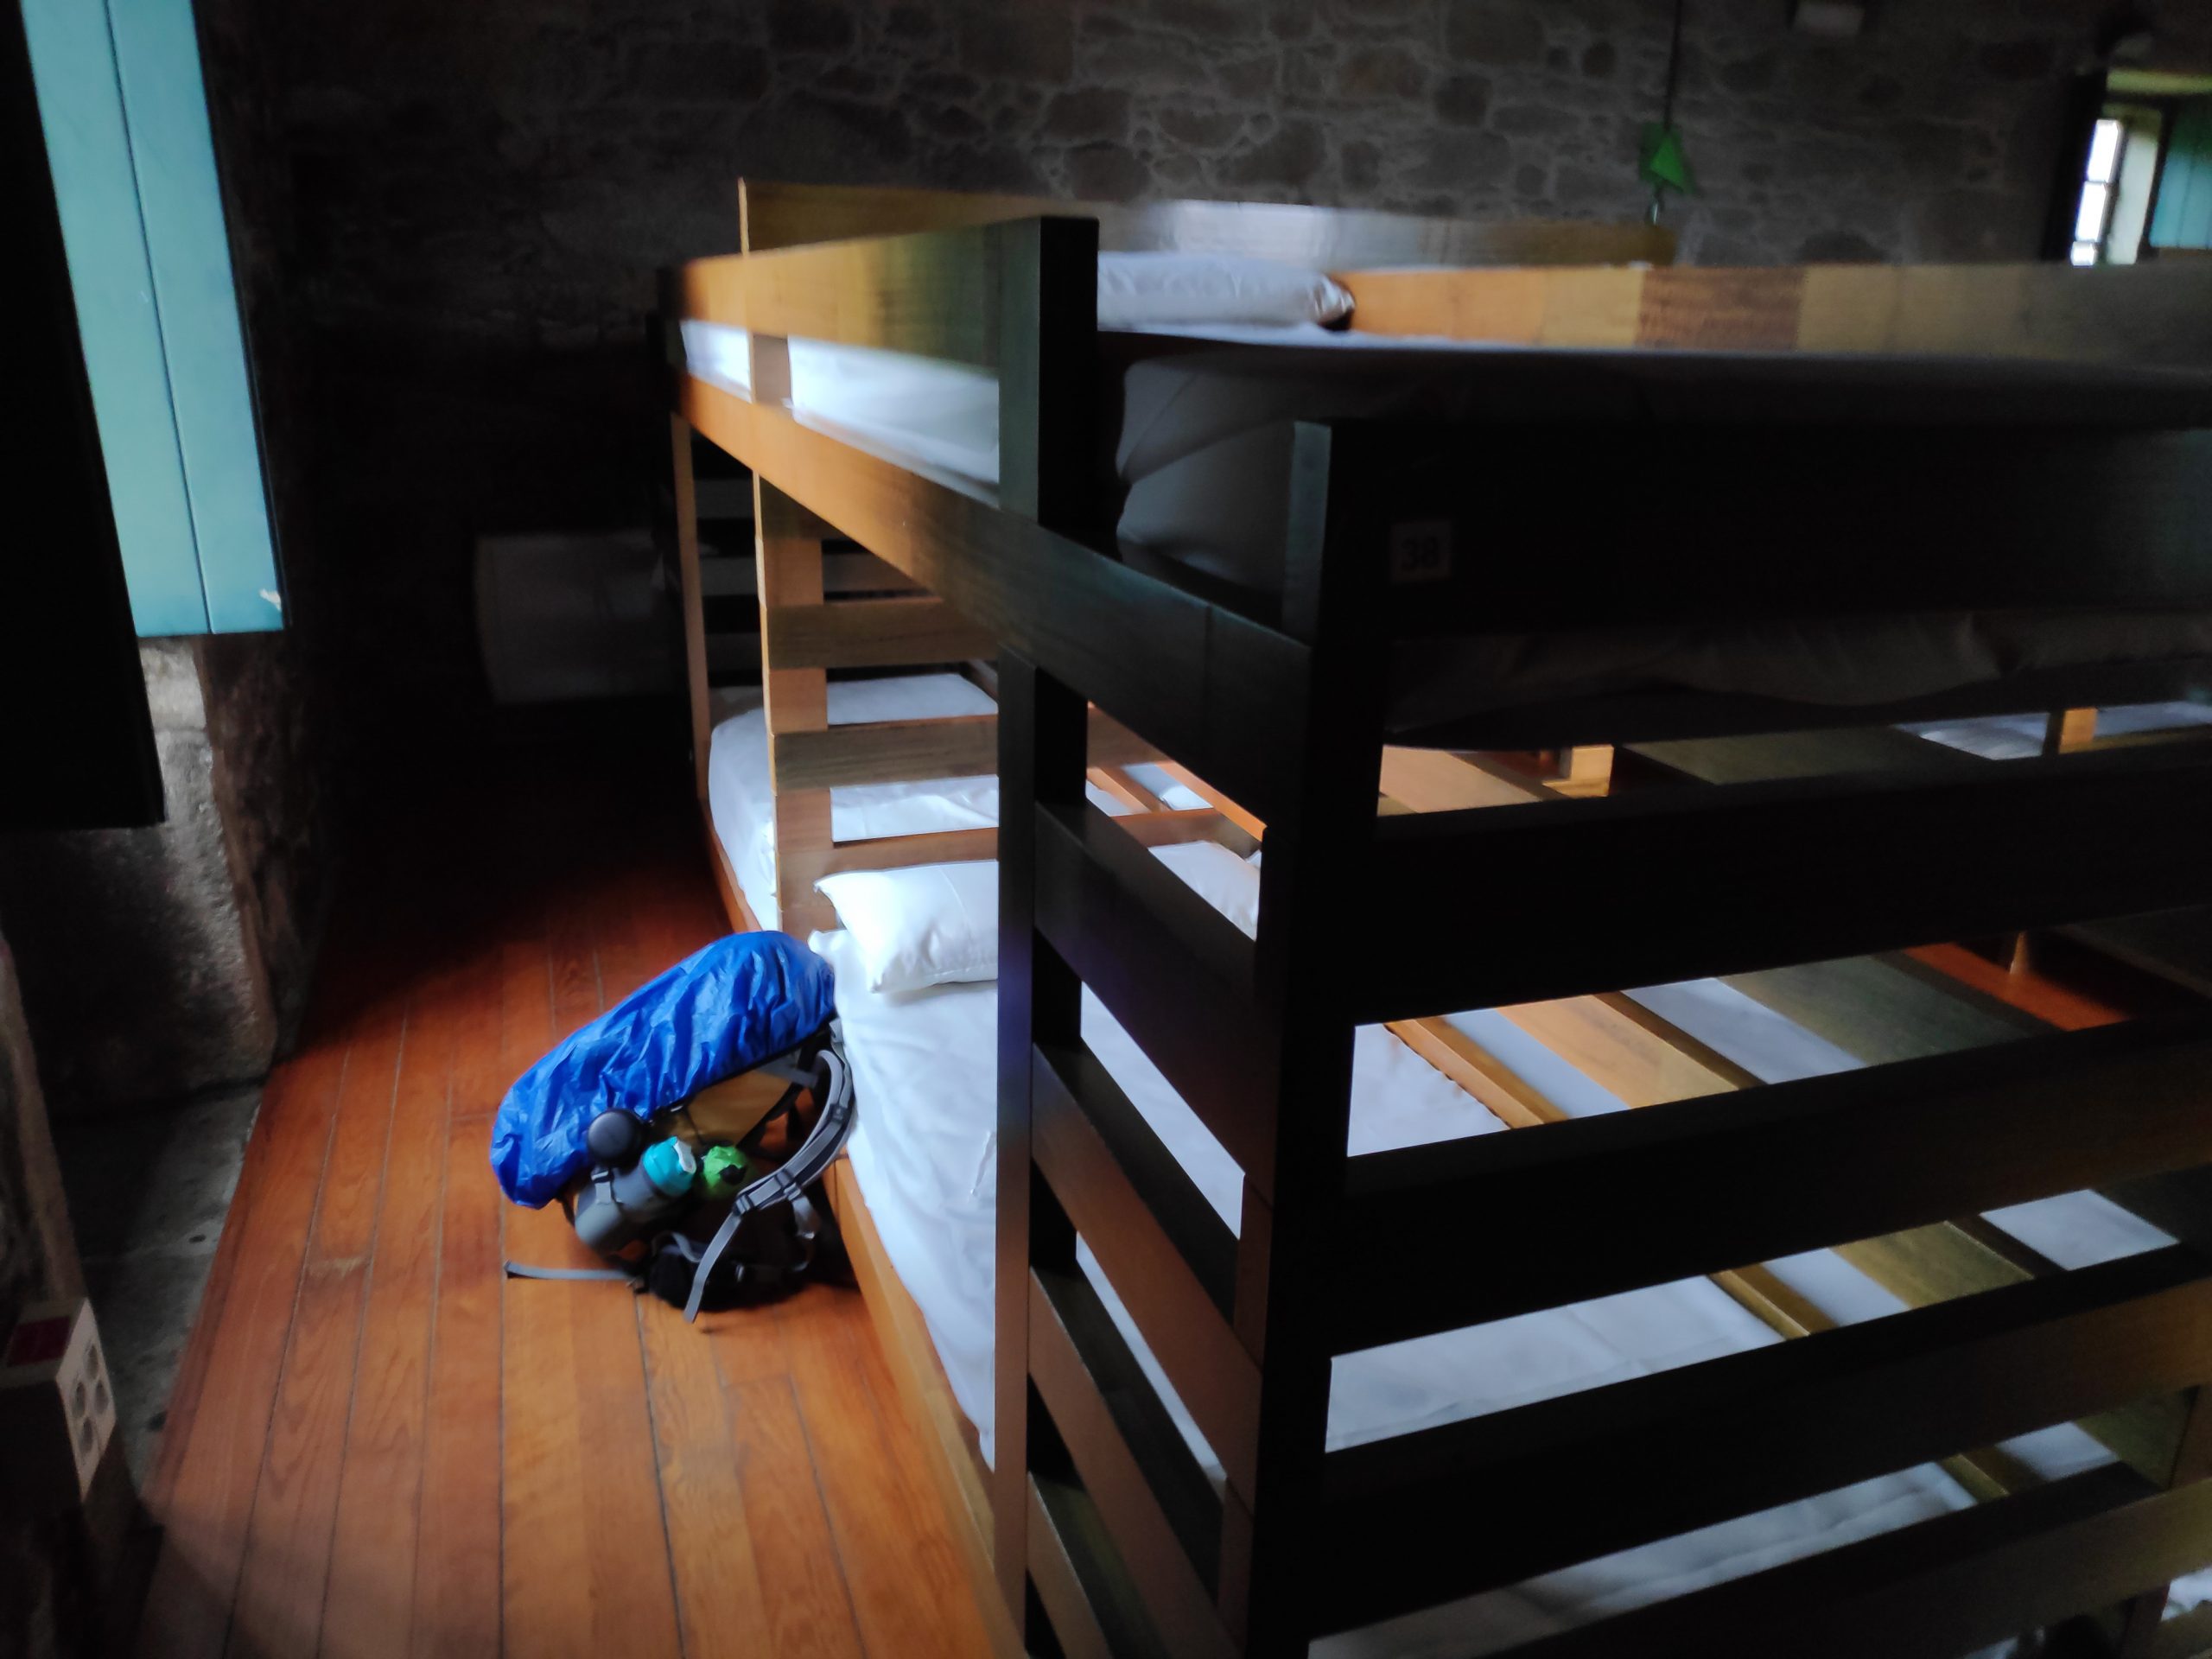 As usually it was mostly empty, so we had our pick of beds, where we wanted to sleep.